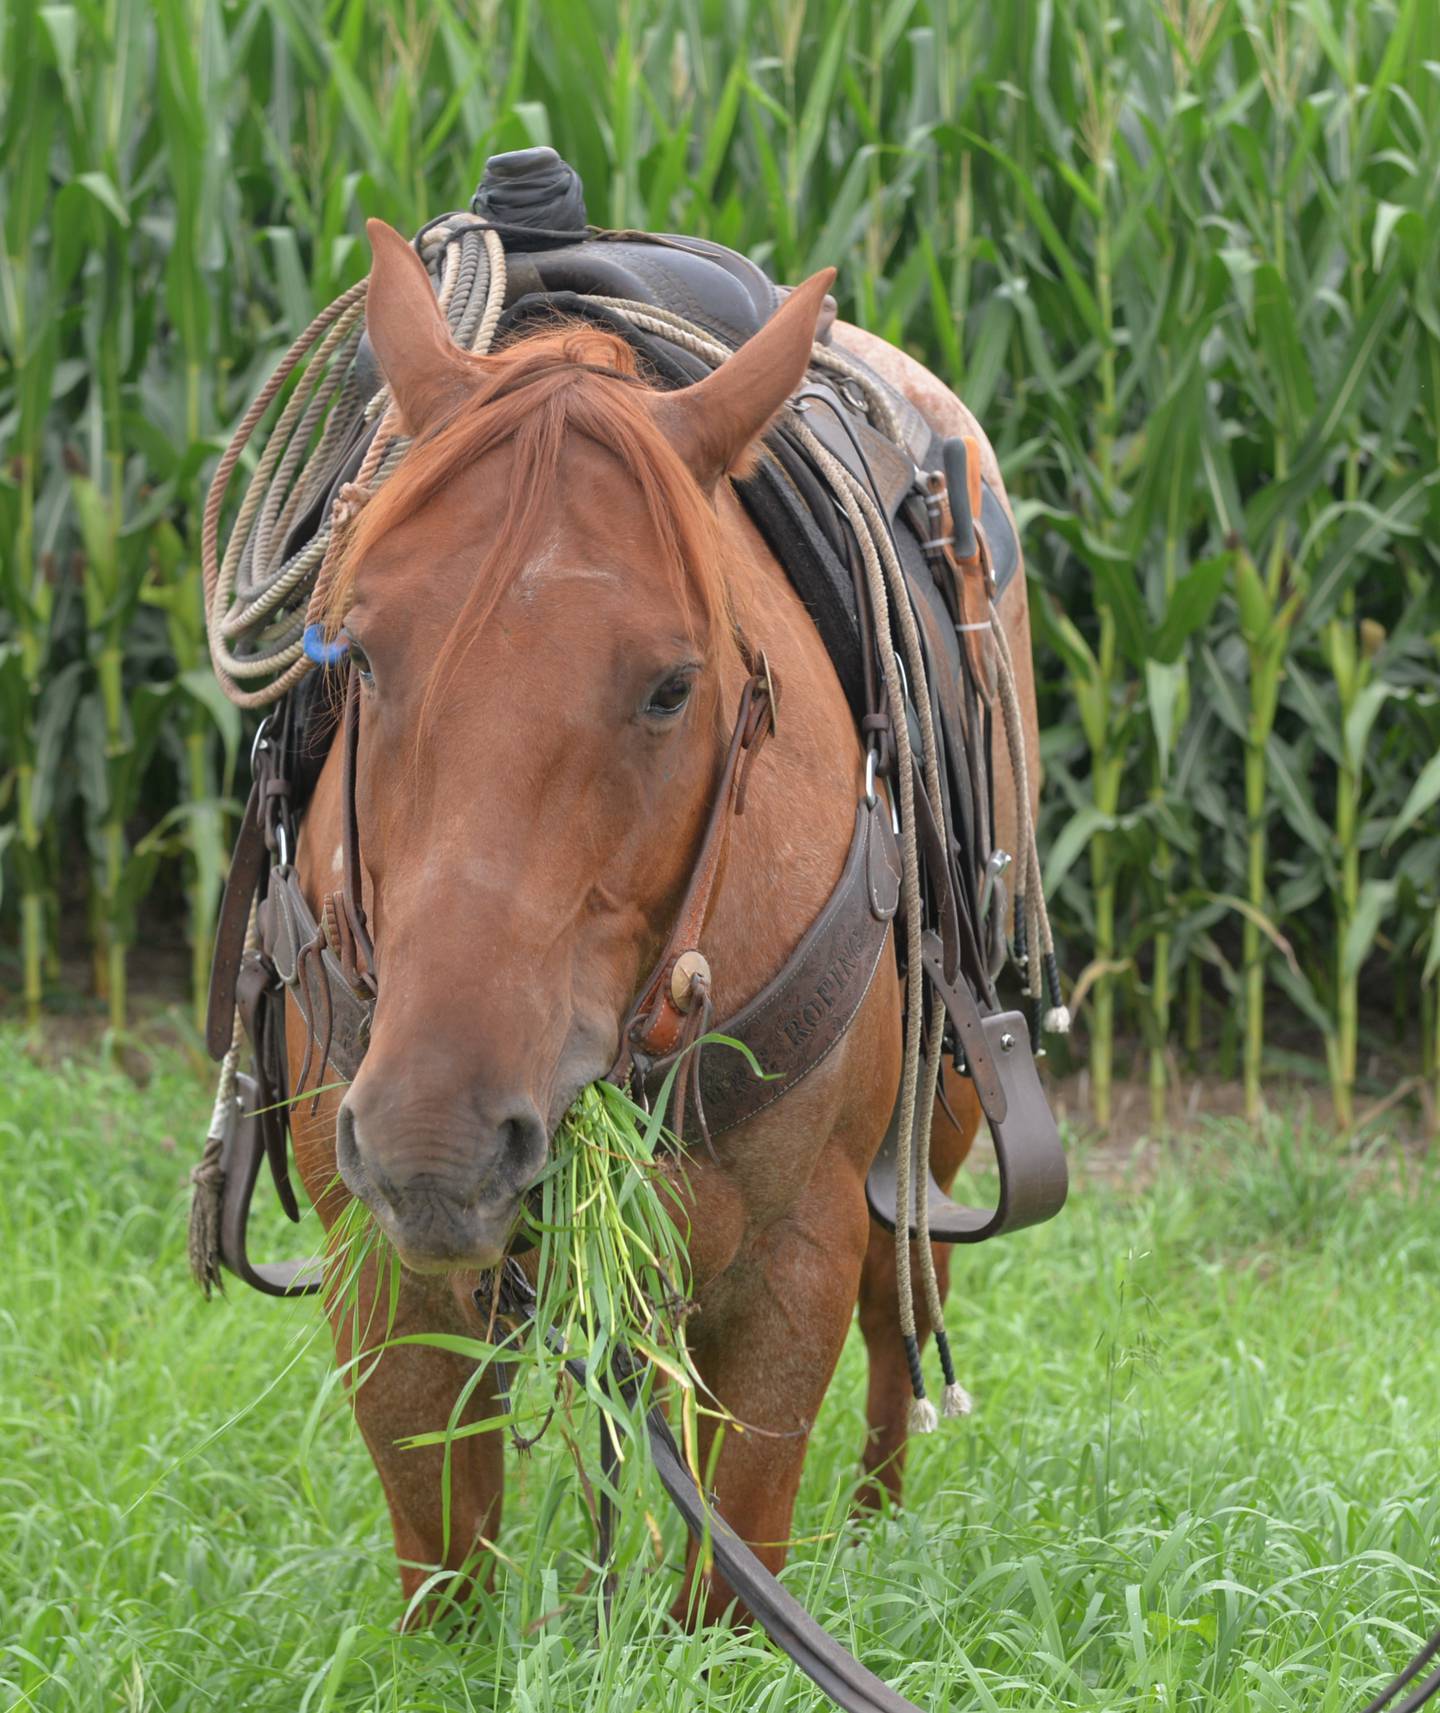 One of Wesley Bush's horses, Willy, enjoys a mouthful of fresh grass near Bush's home on Capp Road, northeast of Morrison. Bush is the owner/operator of 2B Cattle Catching Services.